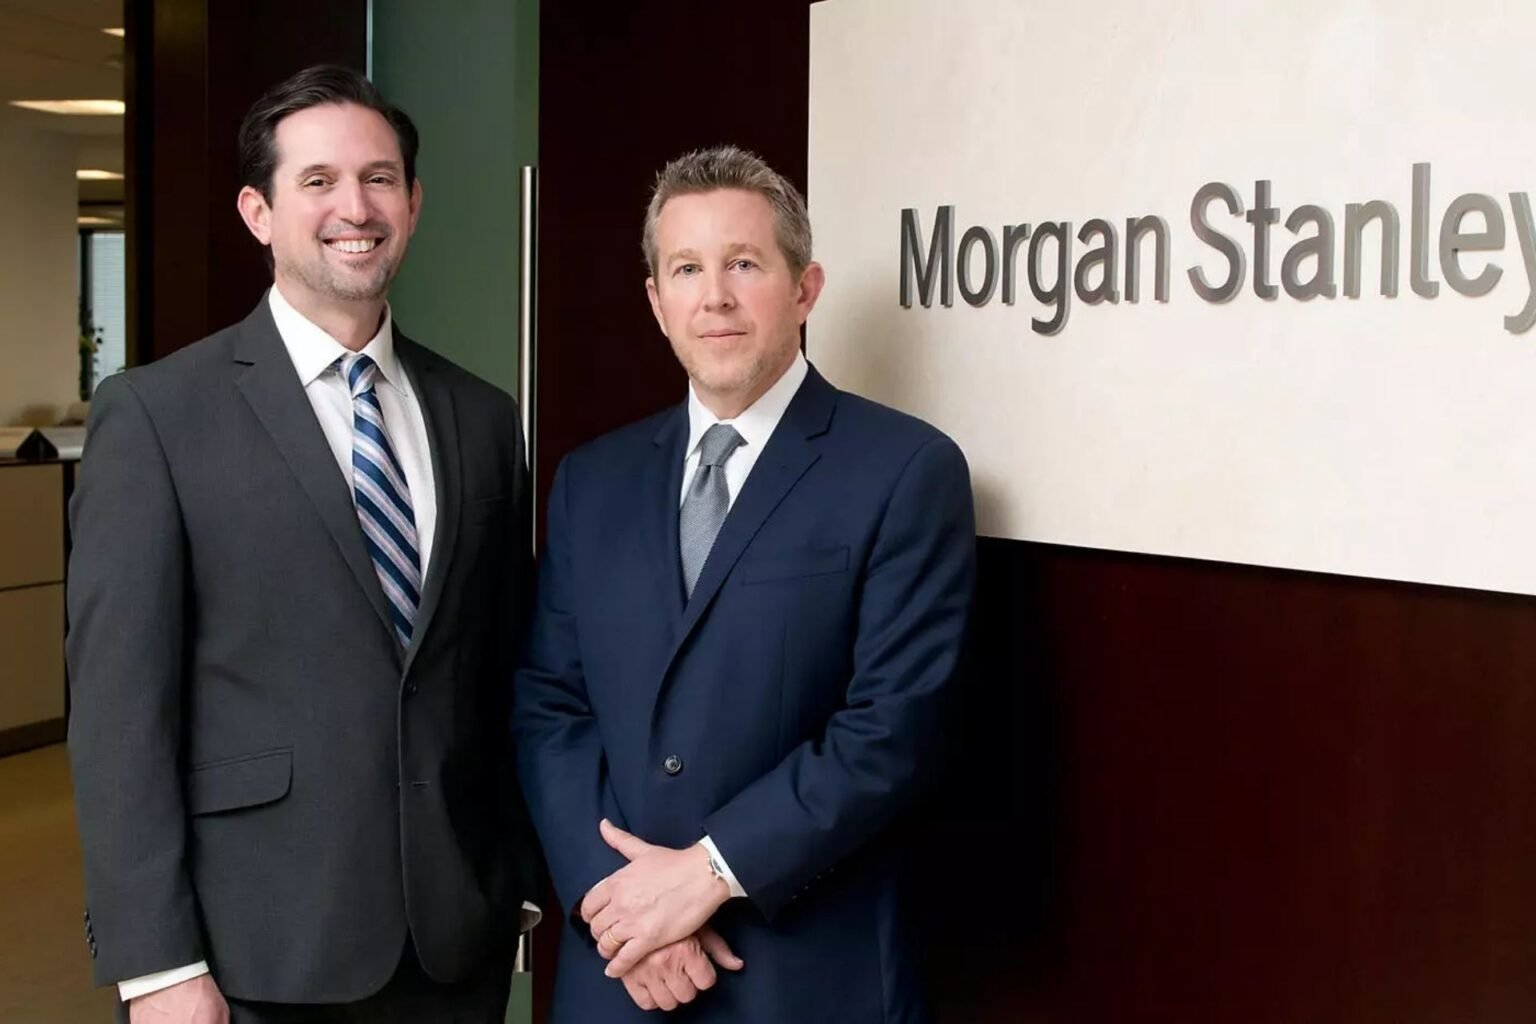 morgan-stanley-s-ceo-is-in-search-of-a-successor